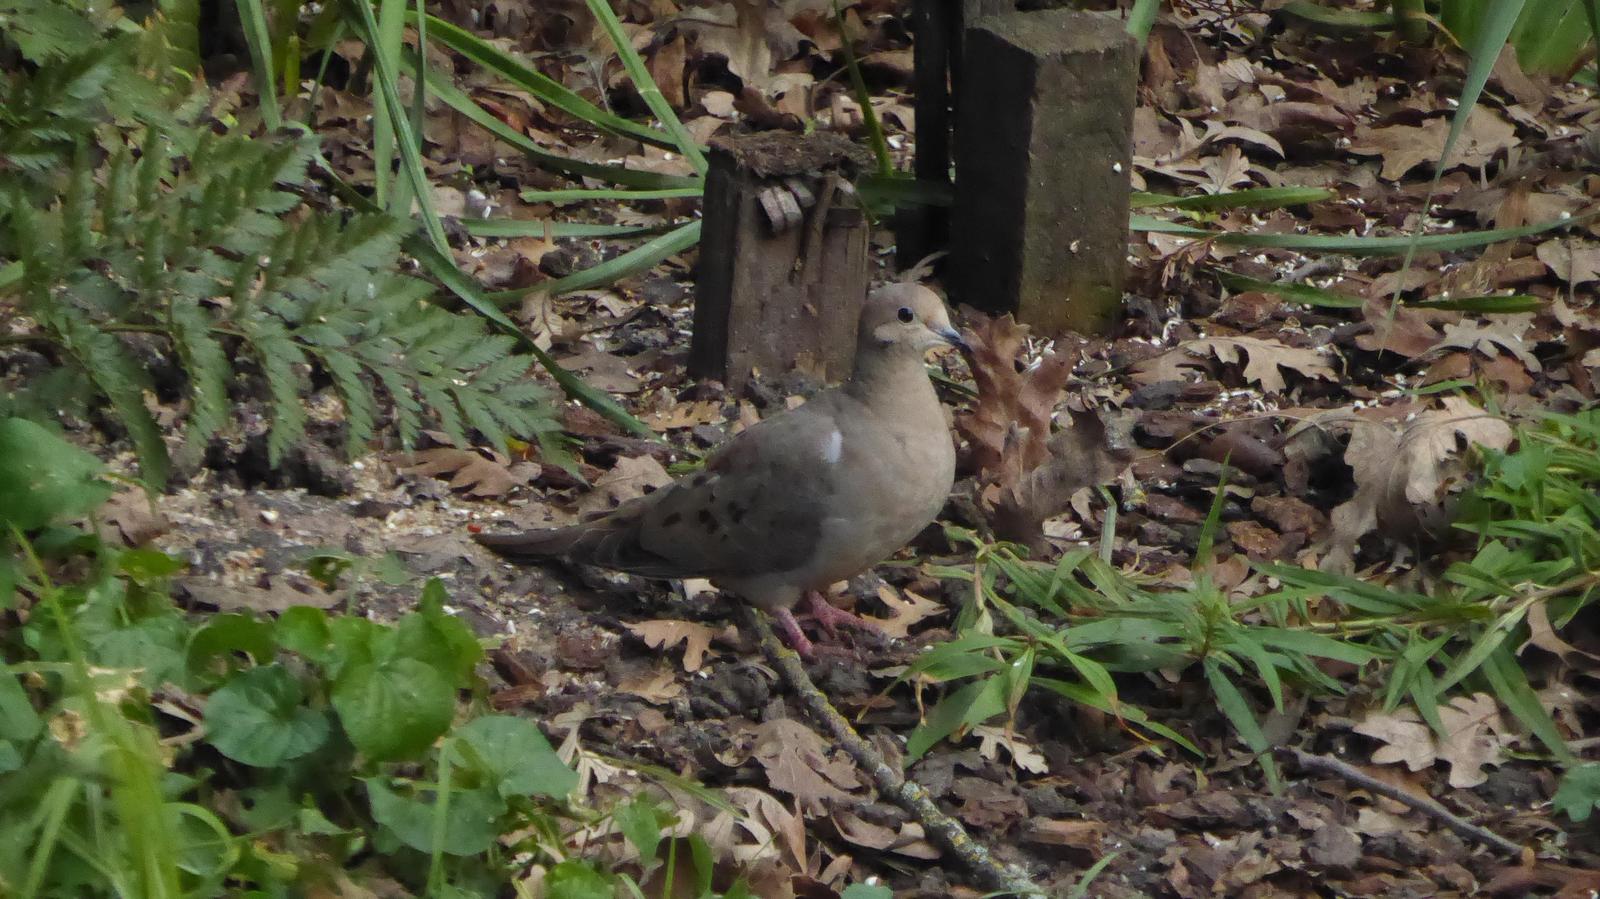 Mourning Dove Photo by Daliel Leite